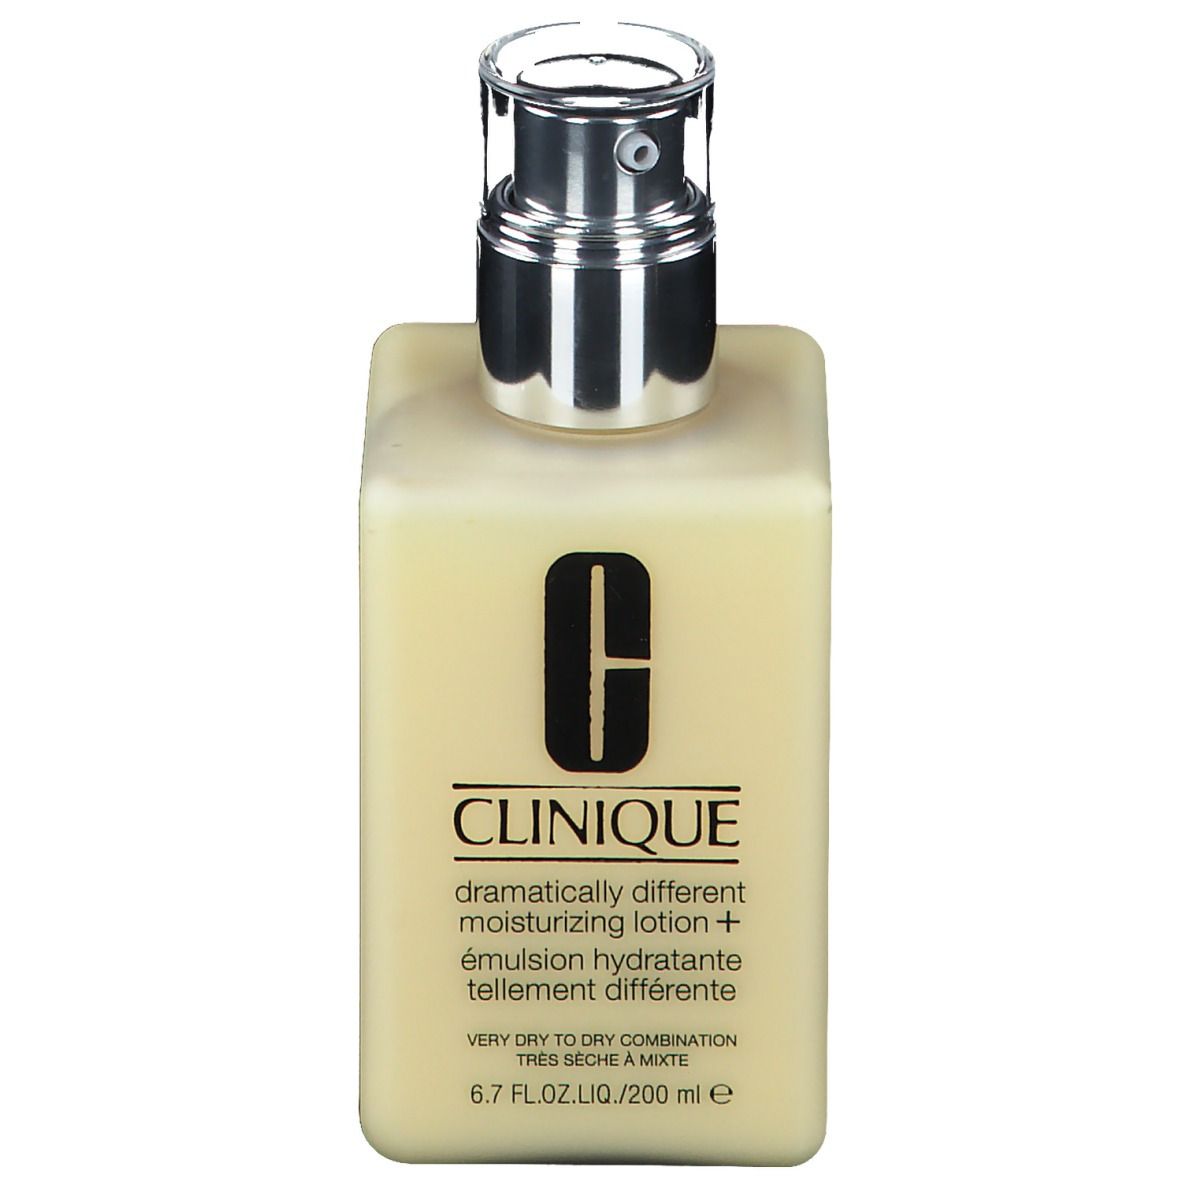 Image of CLINIQUE Dramatically Different Moisturizing Lotion+™